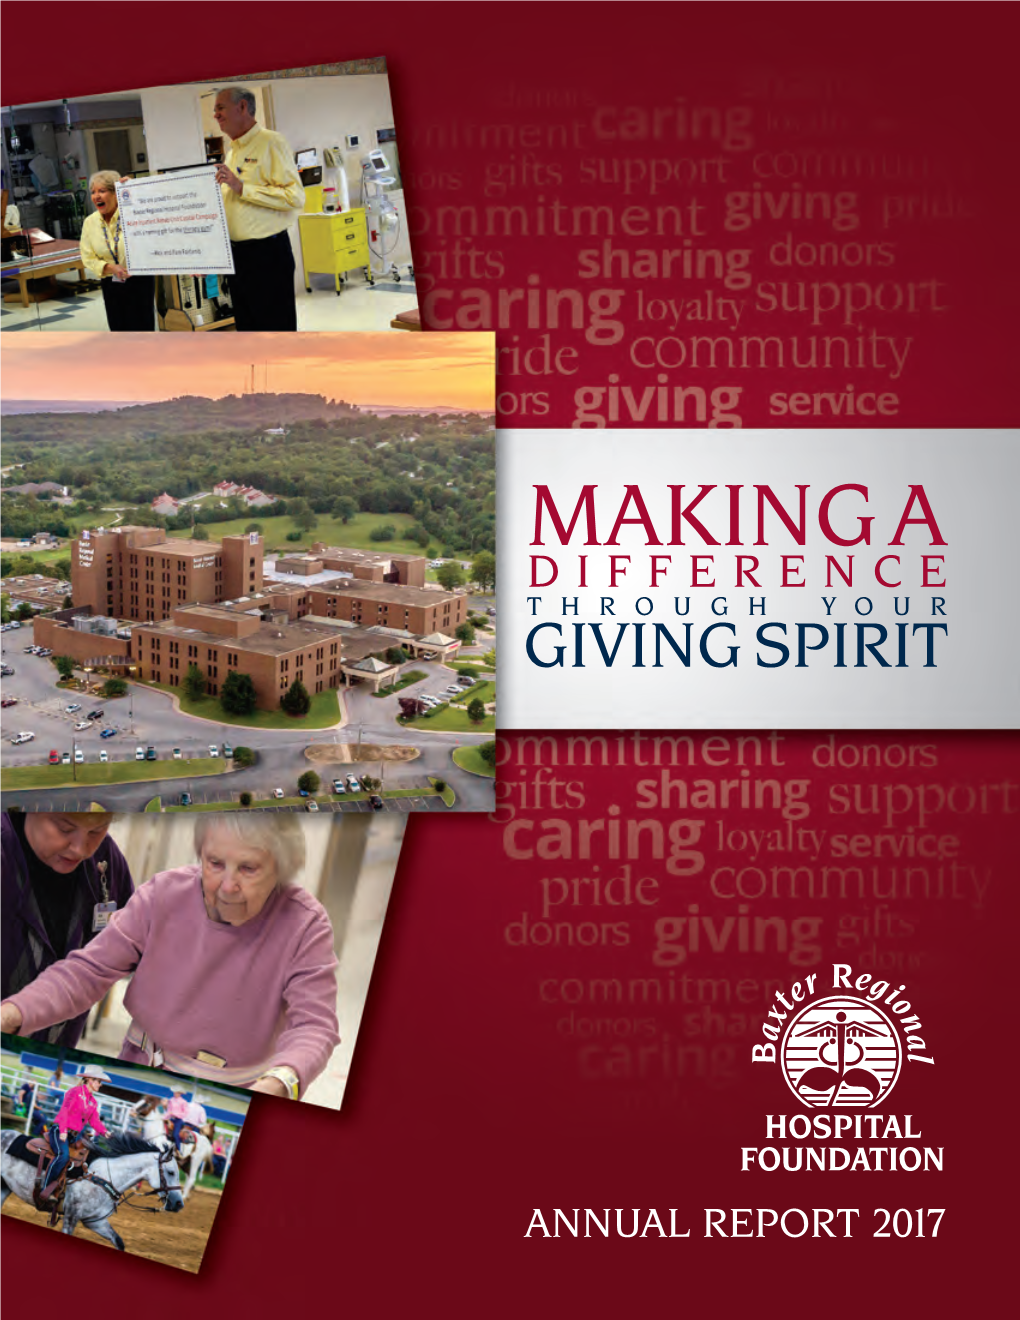 Making a Difference Through Your Giving Spirit